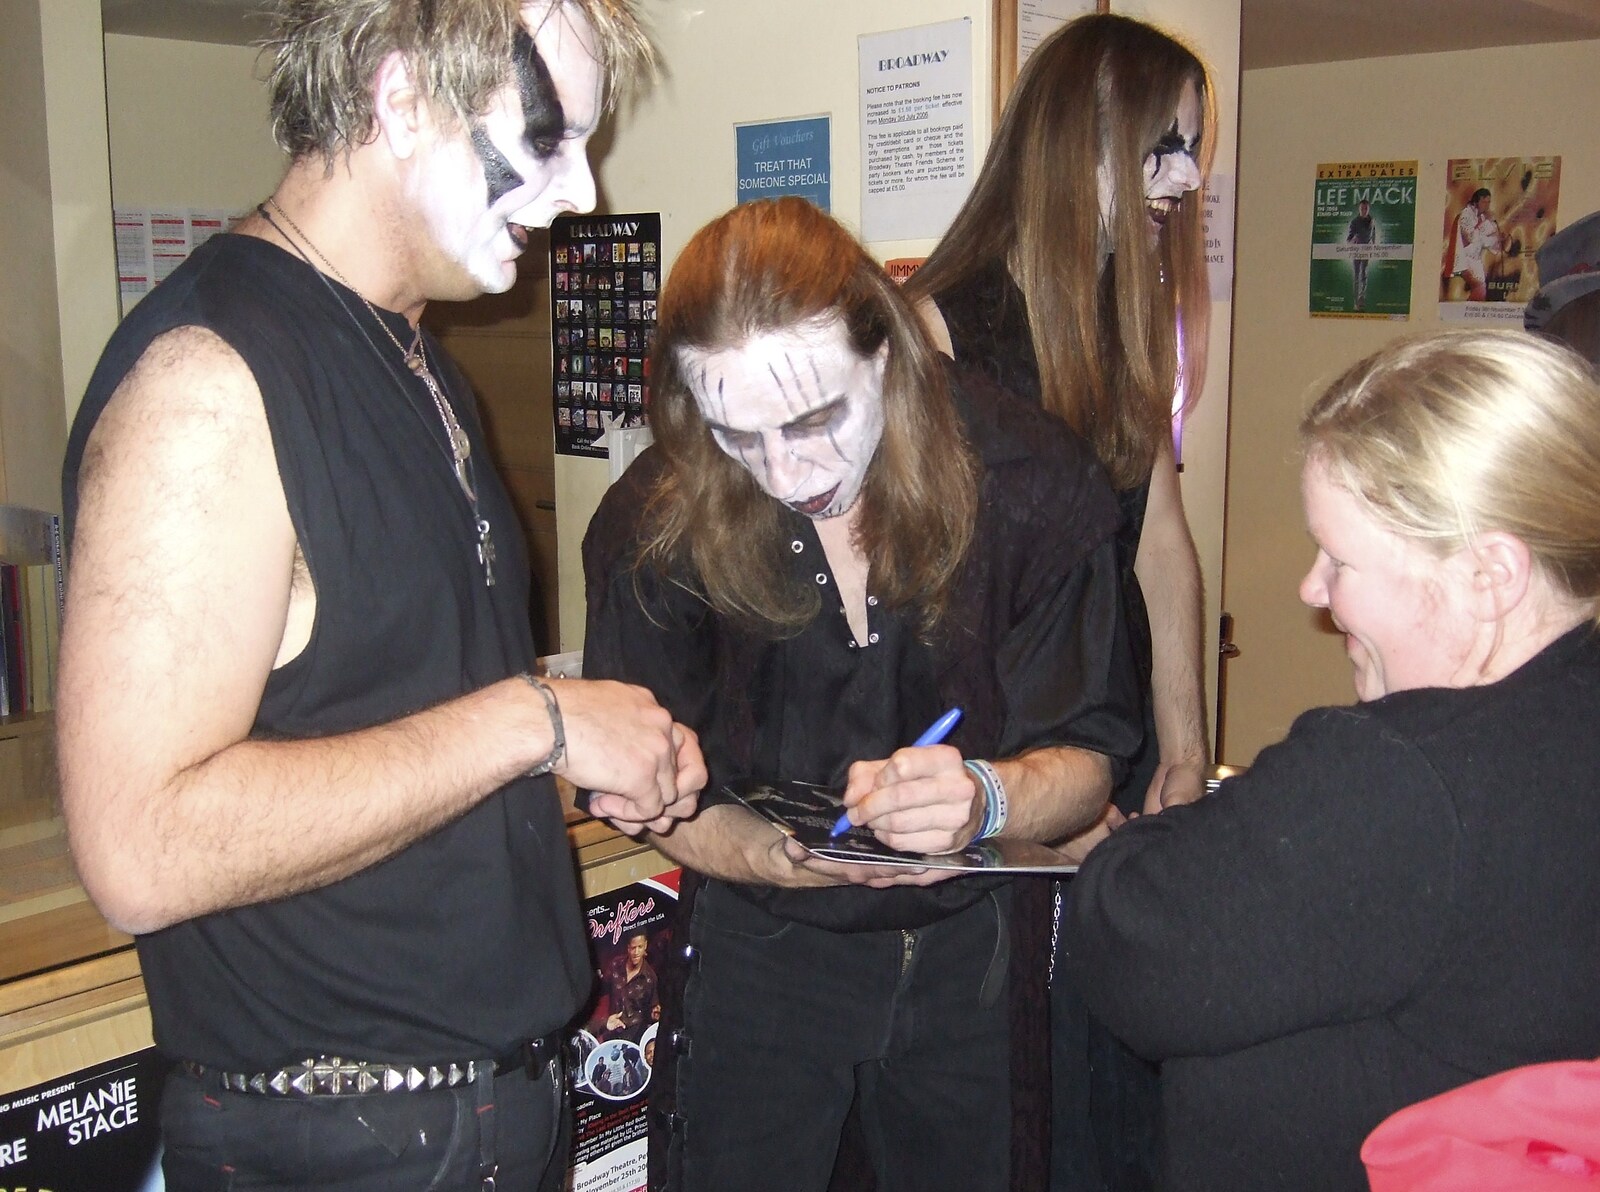 Autographs are signed from Hell Mary and Vampires Rock, Broadway Theatre, Peterborough - 26th October 2007